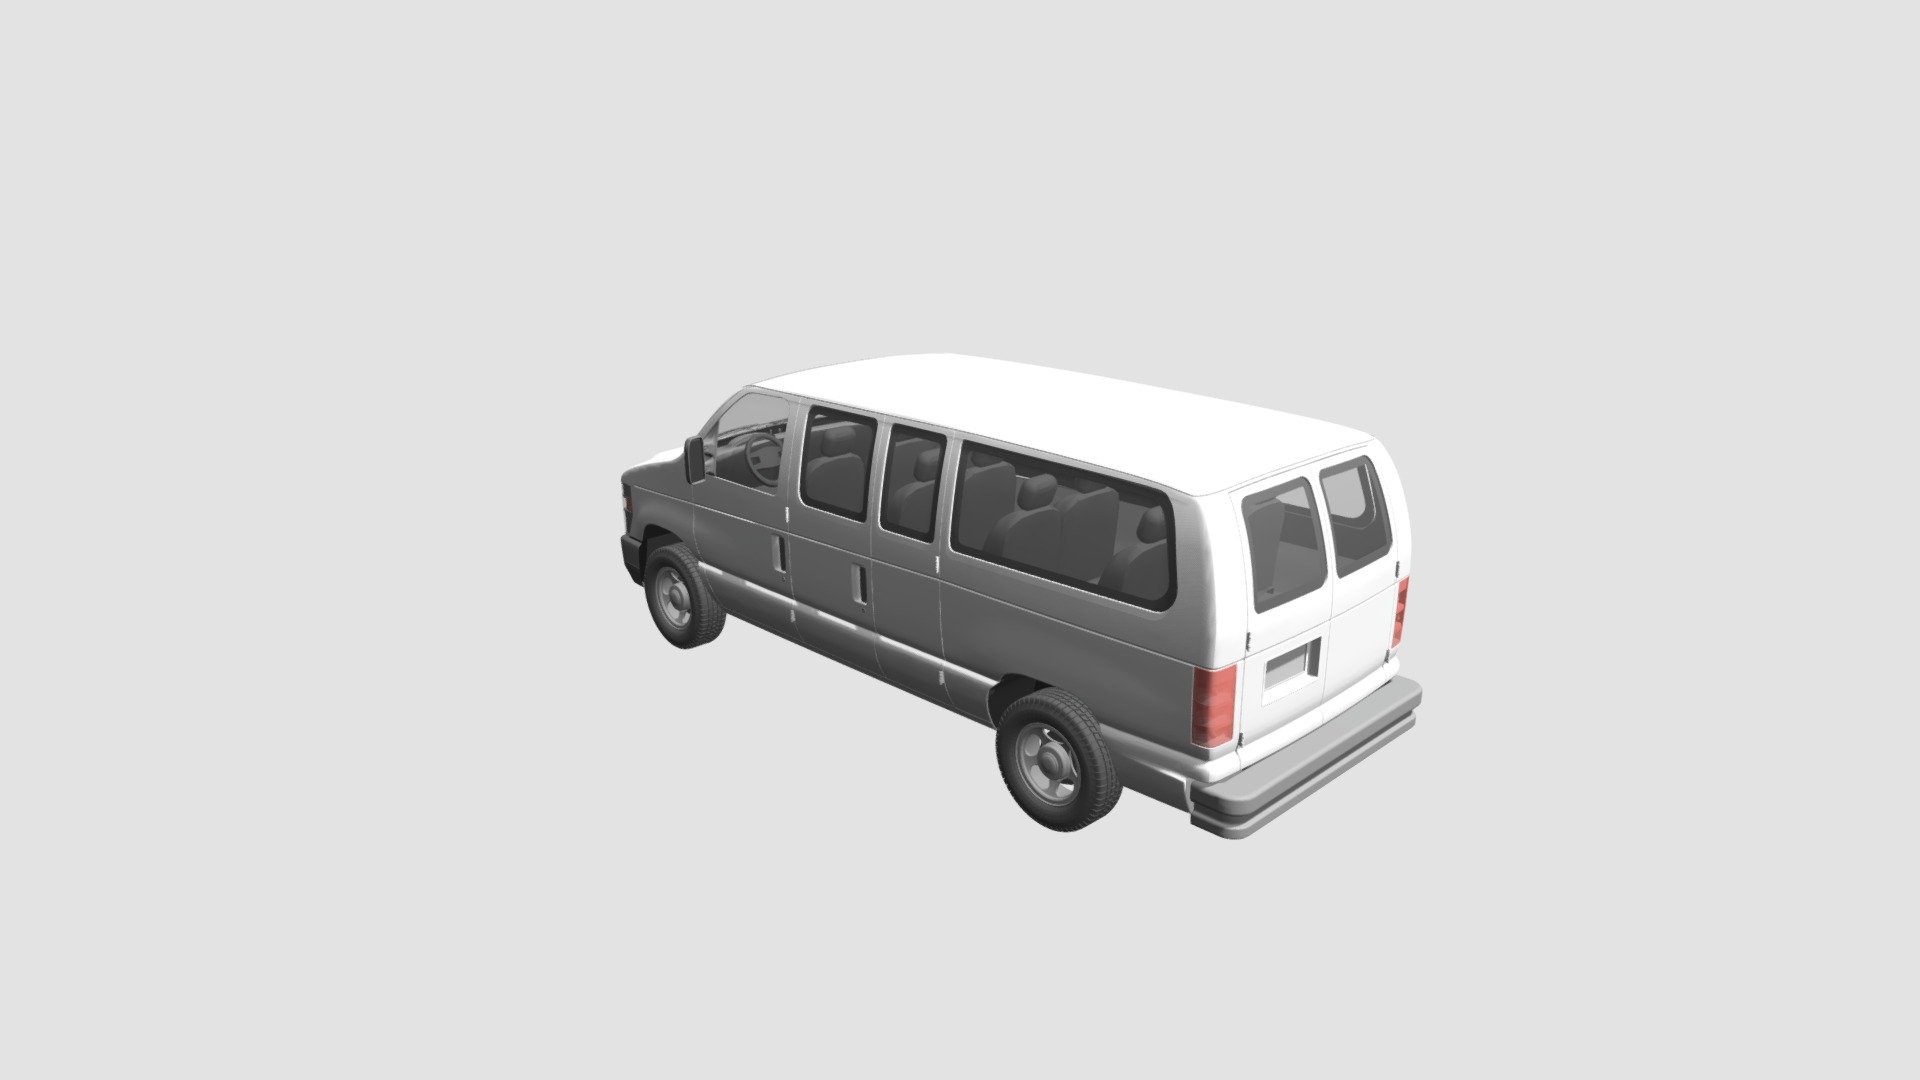 Highly detailed model of mini bus with all textures, shaders and materials. It is ready to use, just put it into your scene 3d model